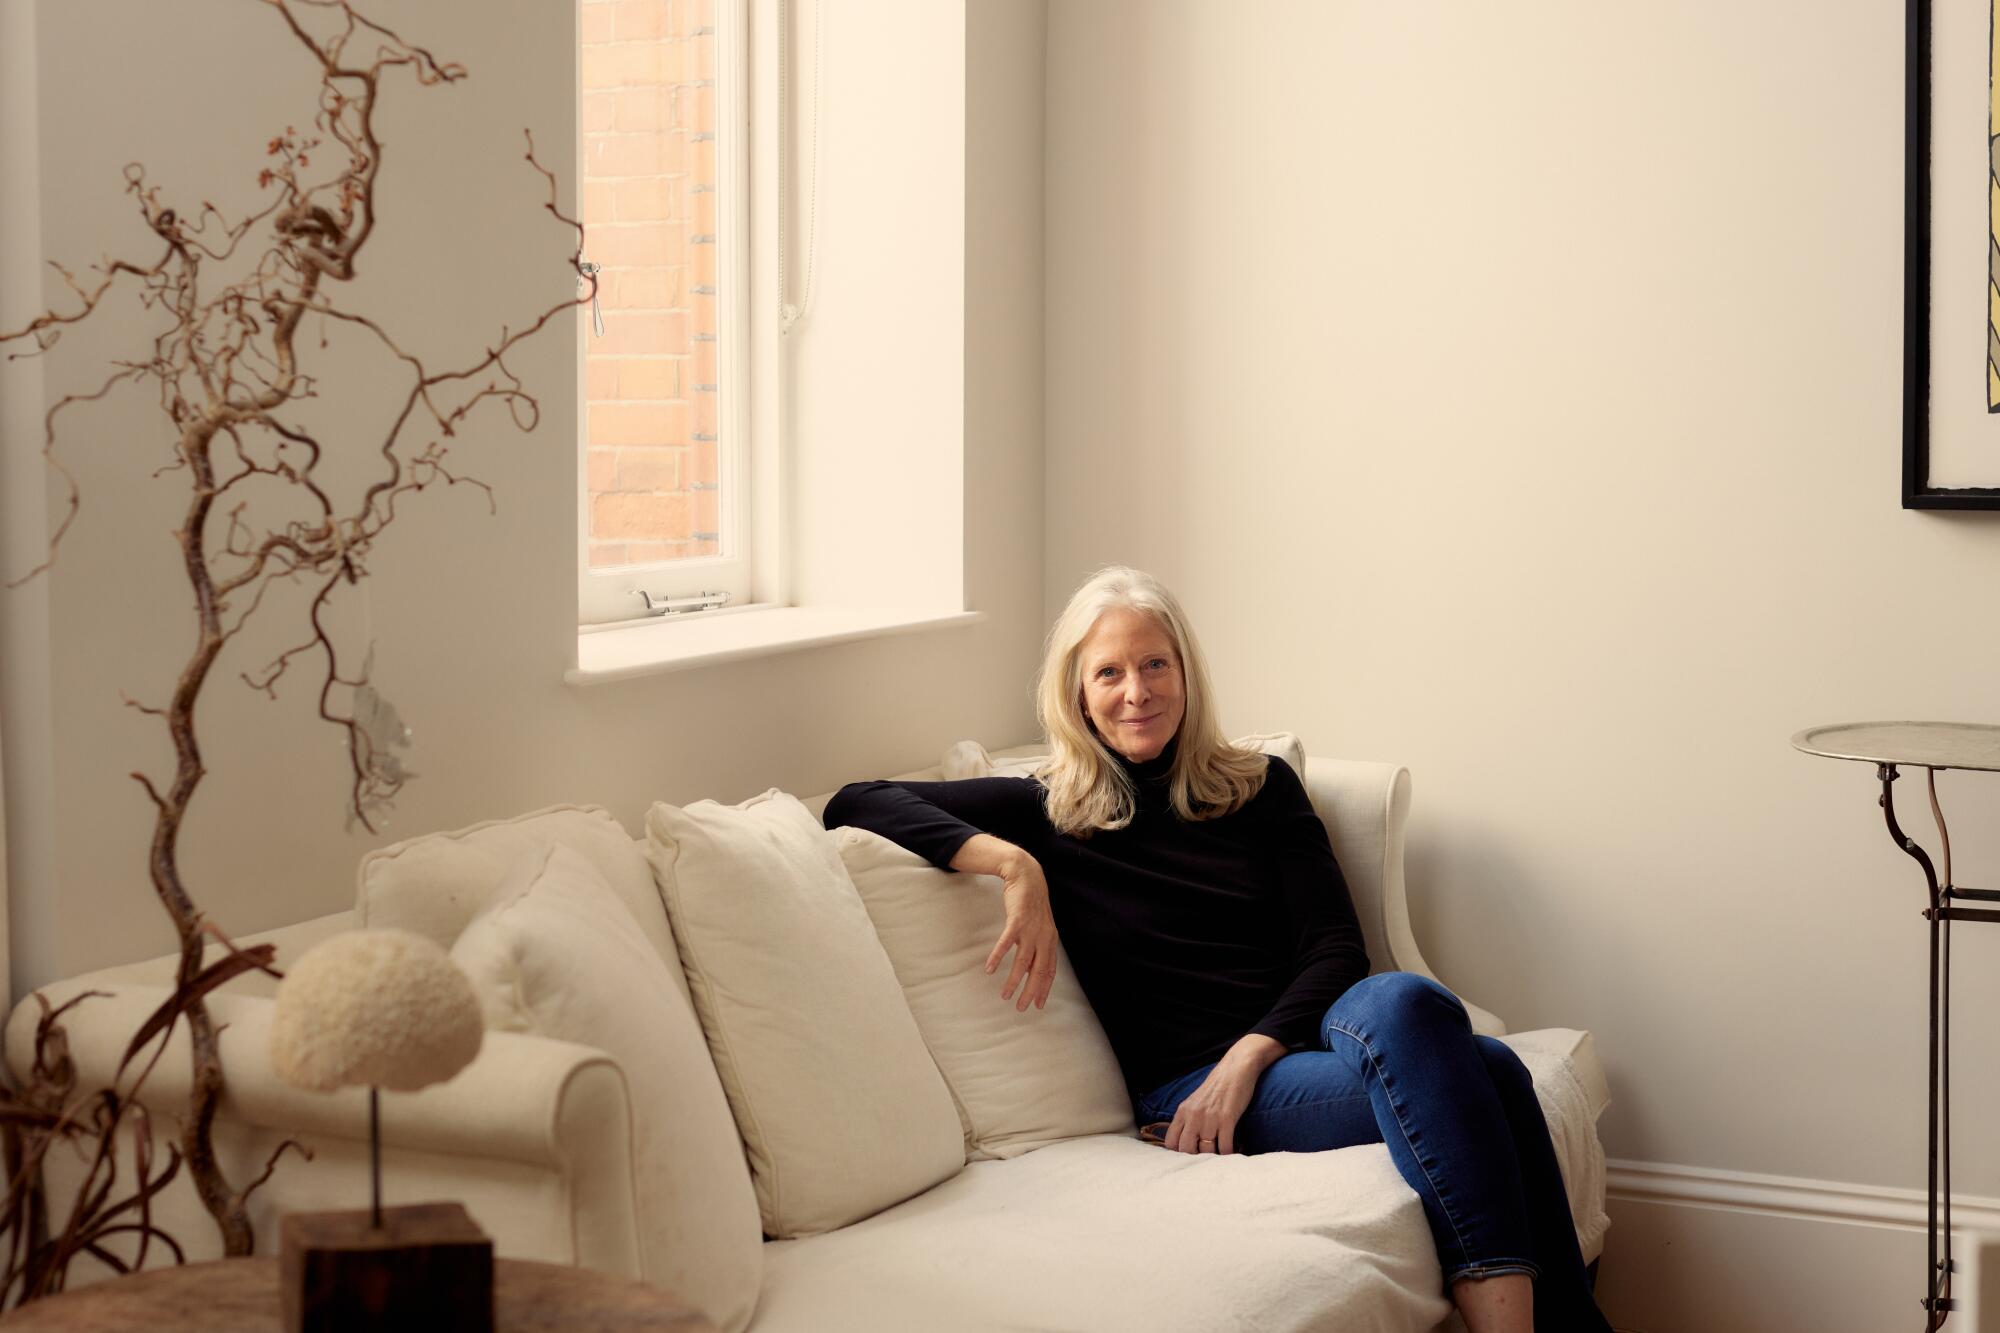 Bonnie Garmus, in a black turtleneck and blue jeans, sits on a white couch in her home.